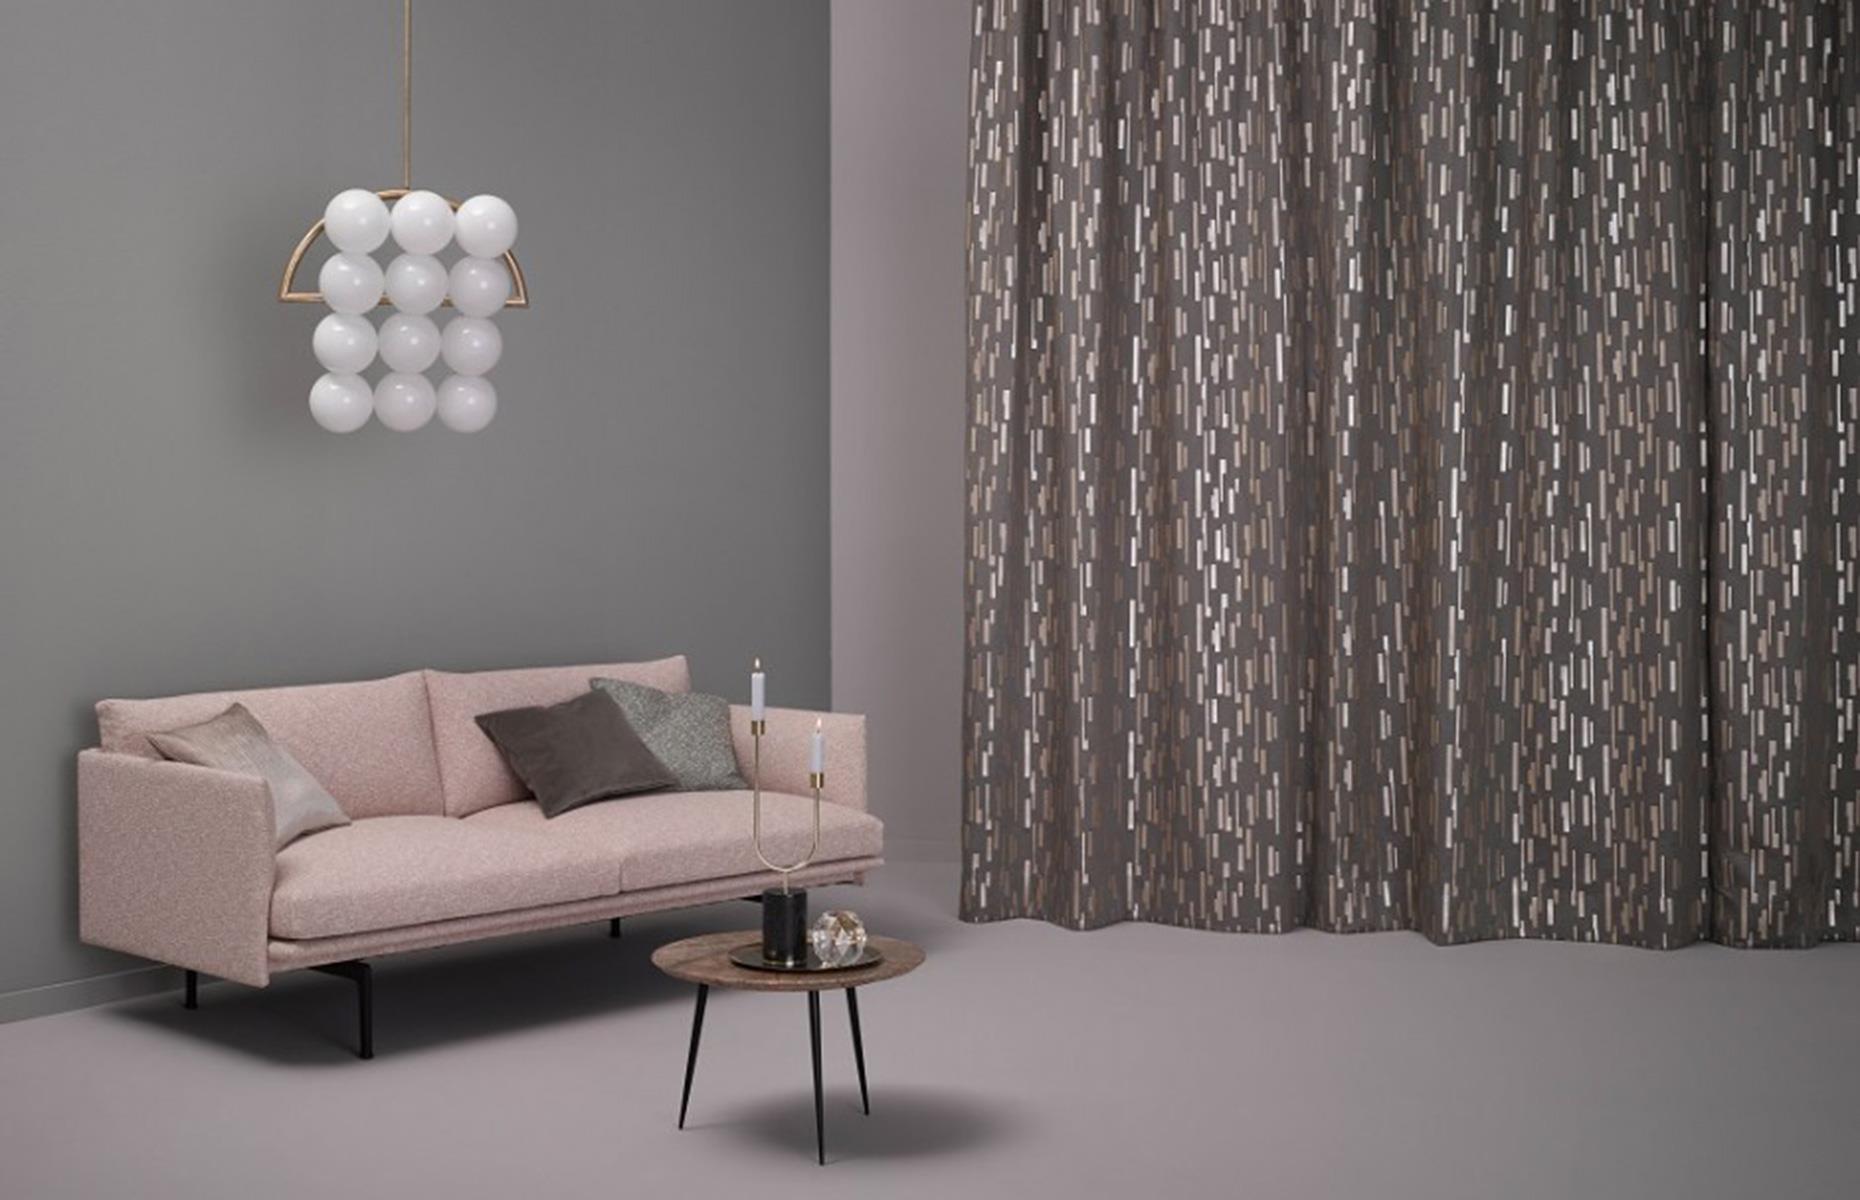 A neutral contemporary living room with embellished metallic curtain